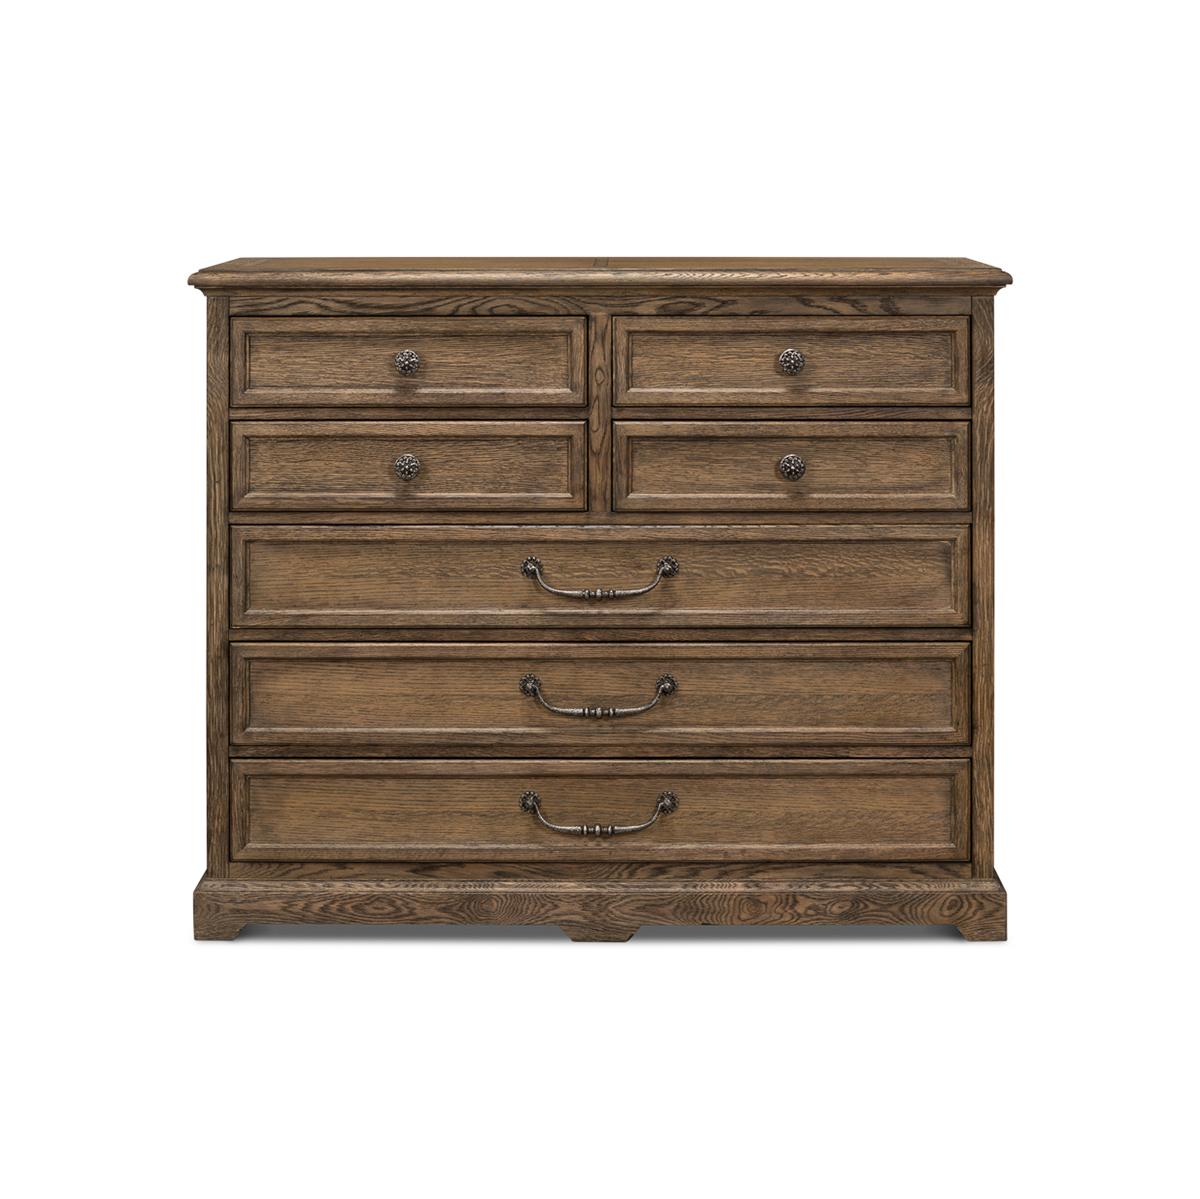 This elegant and grandly scaled iteration in a husk finish is crafted in oak crown veneer with all the hallmarks of furniture craft and quality construction. Bold, masculine, and fitted with seven drawers and exclusive cast iron